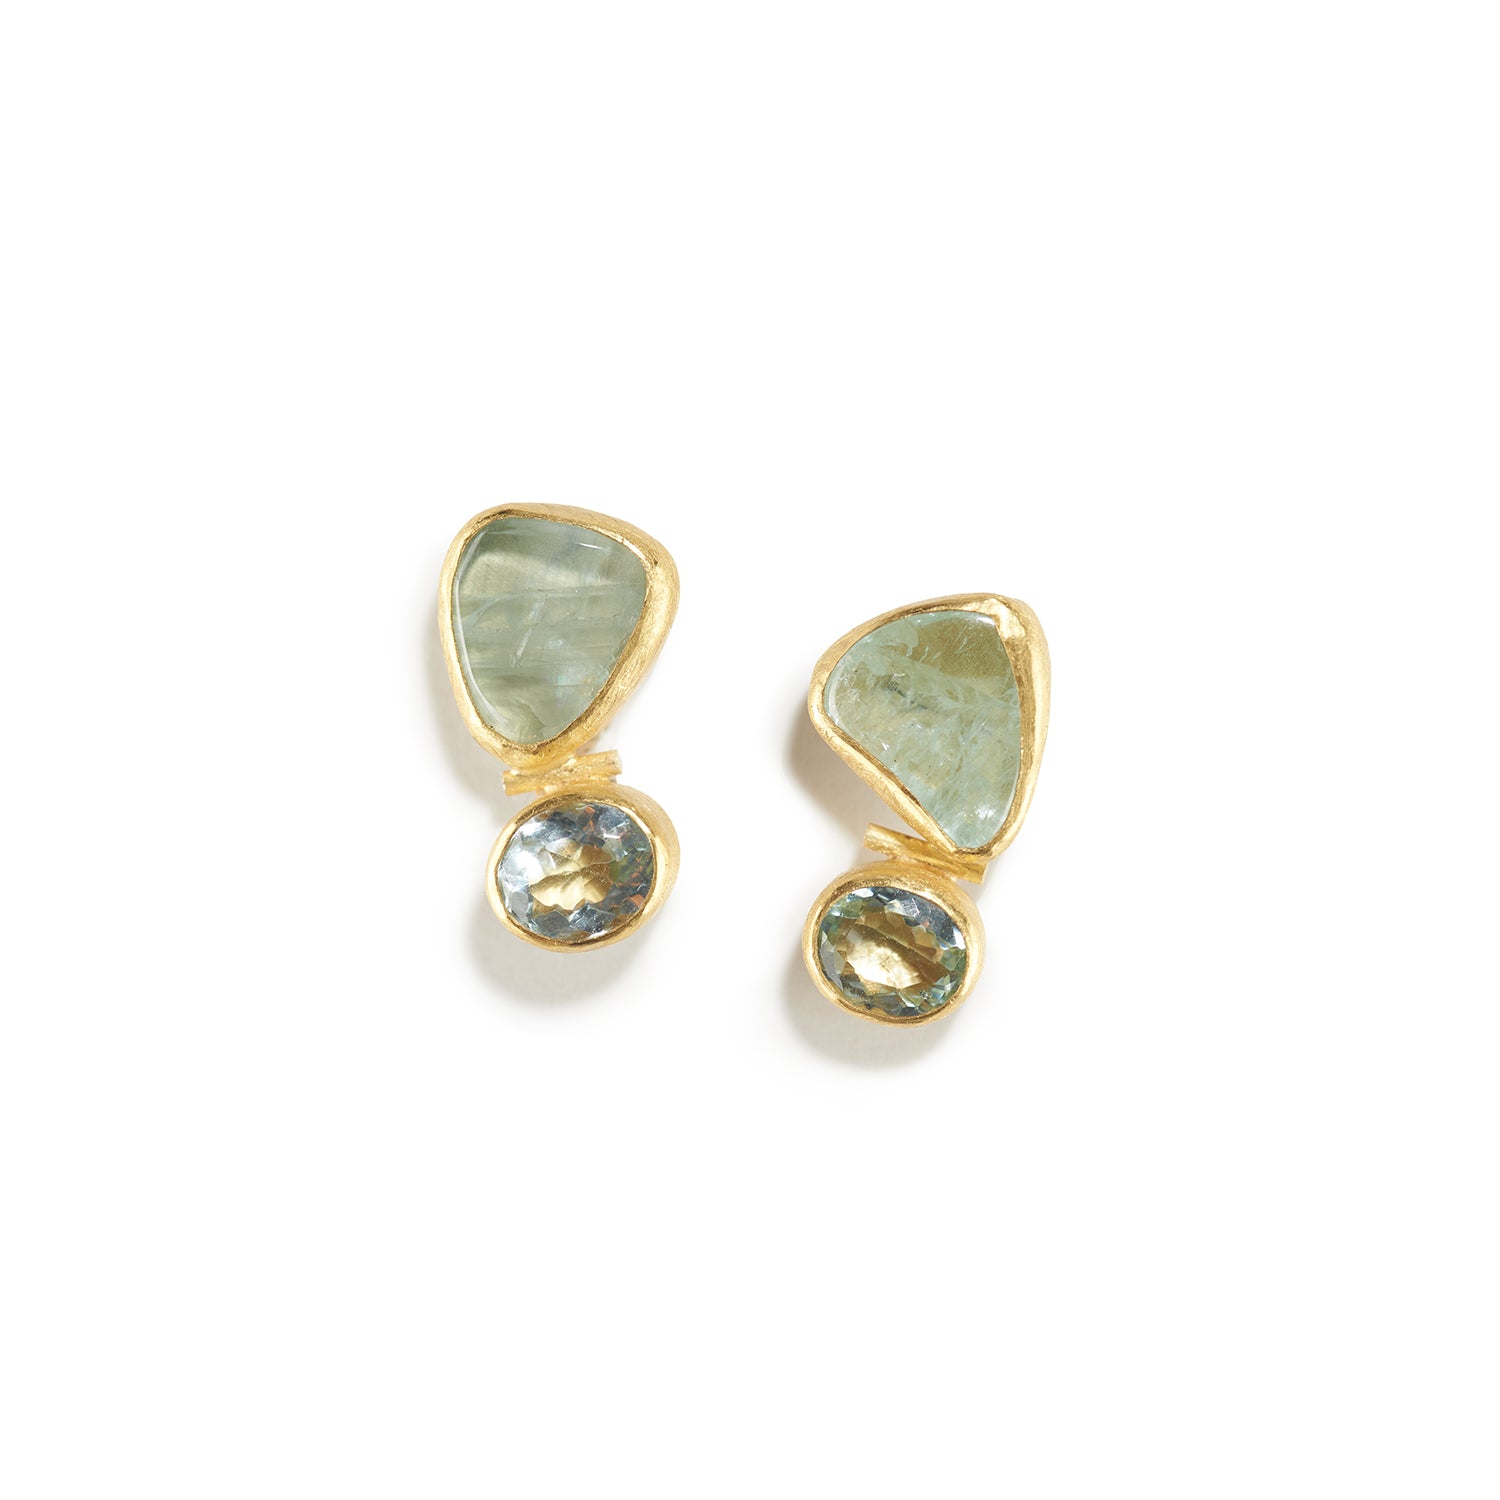 Aquamarine Pebble and Faceted Oval Earrings